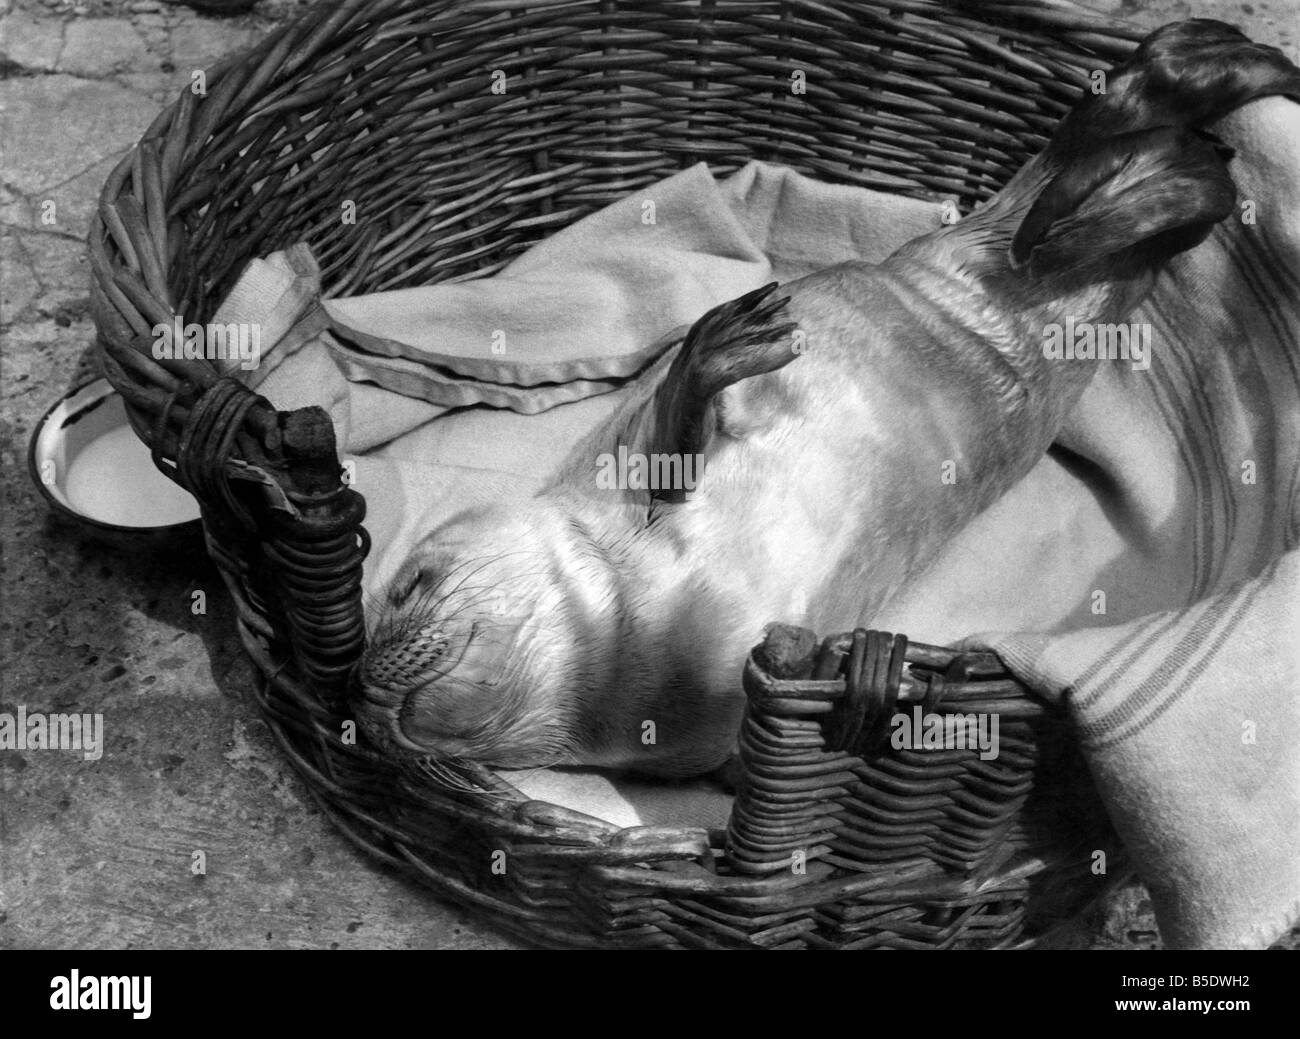 Sinbad sleeps peacefully in his basket. For his sake don't let any other seals see this picture! He'd never live it down! July 1955 P000754 Stock Photo